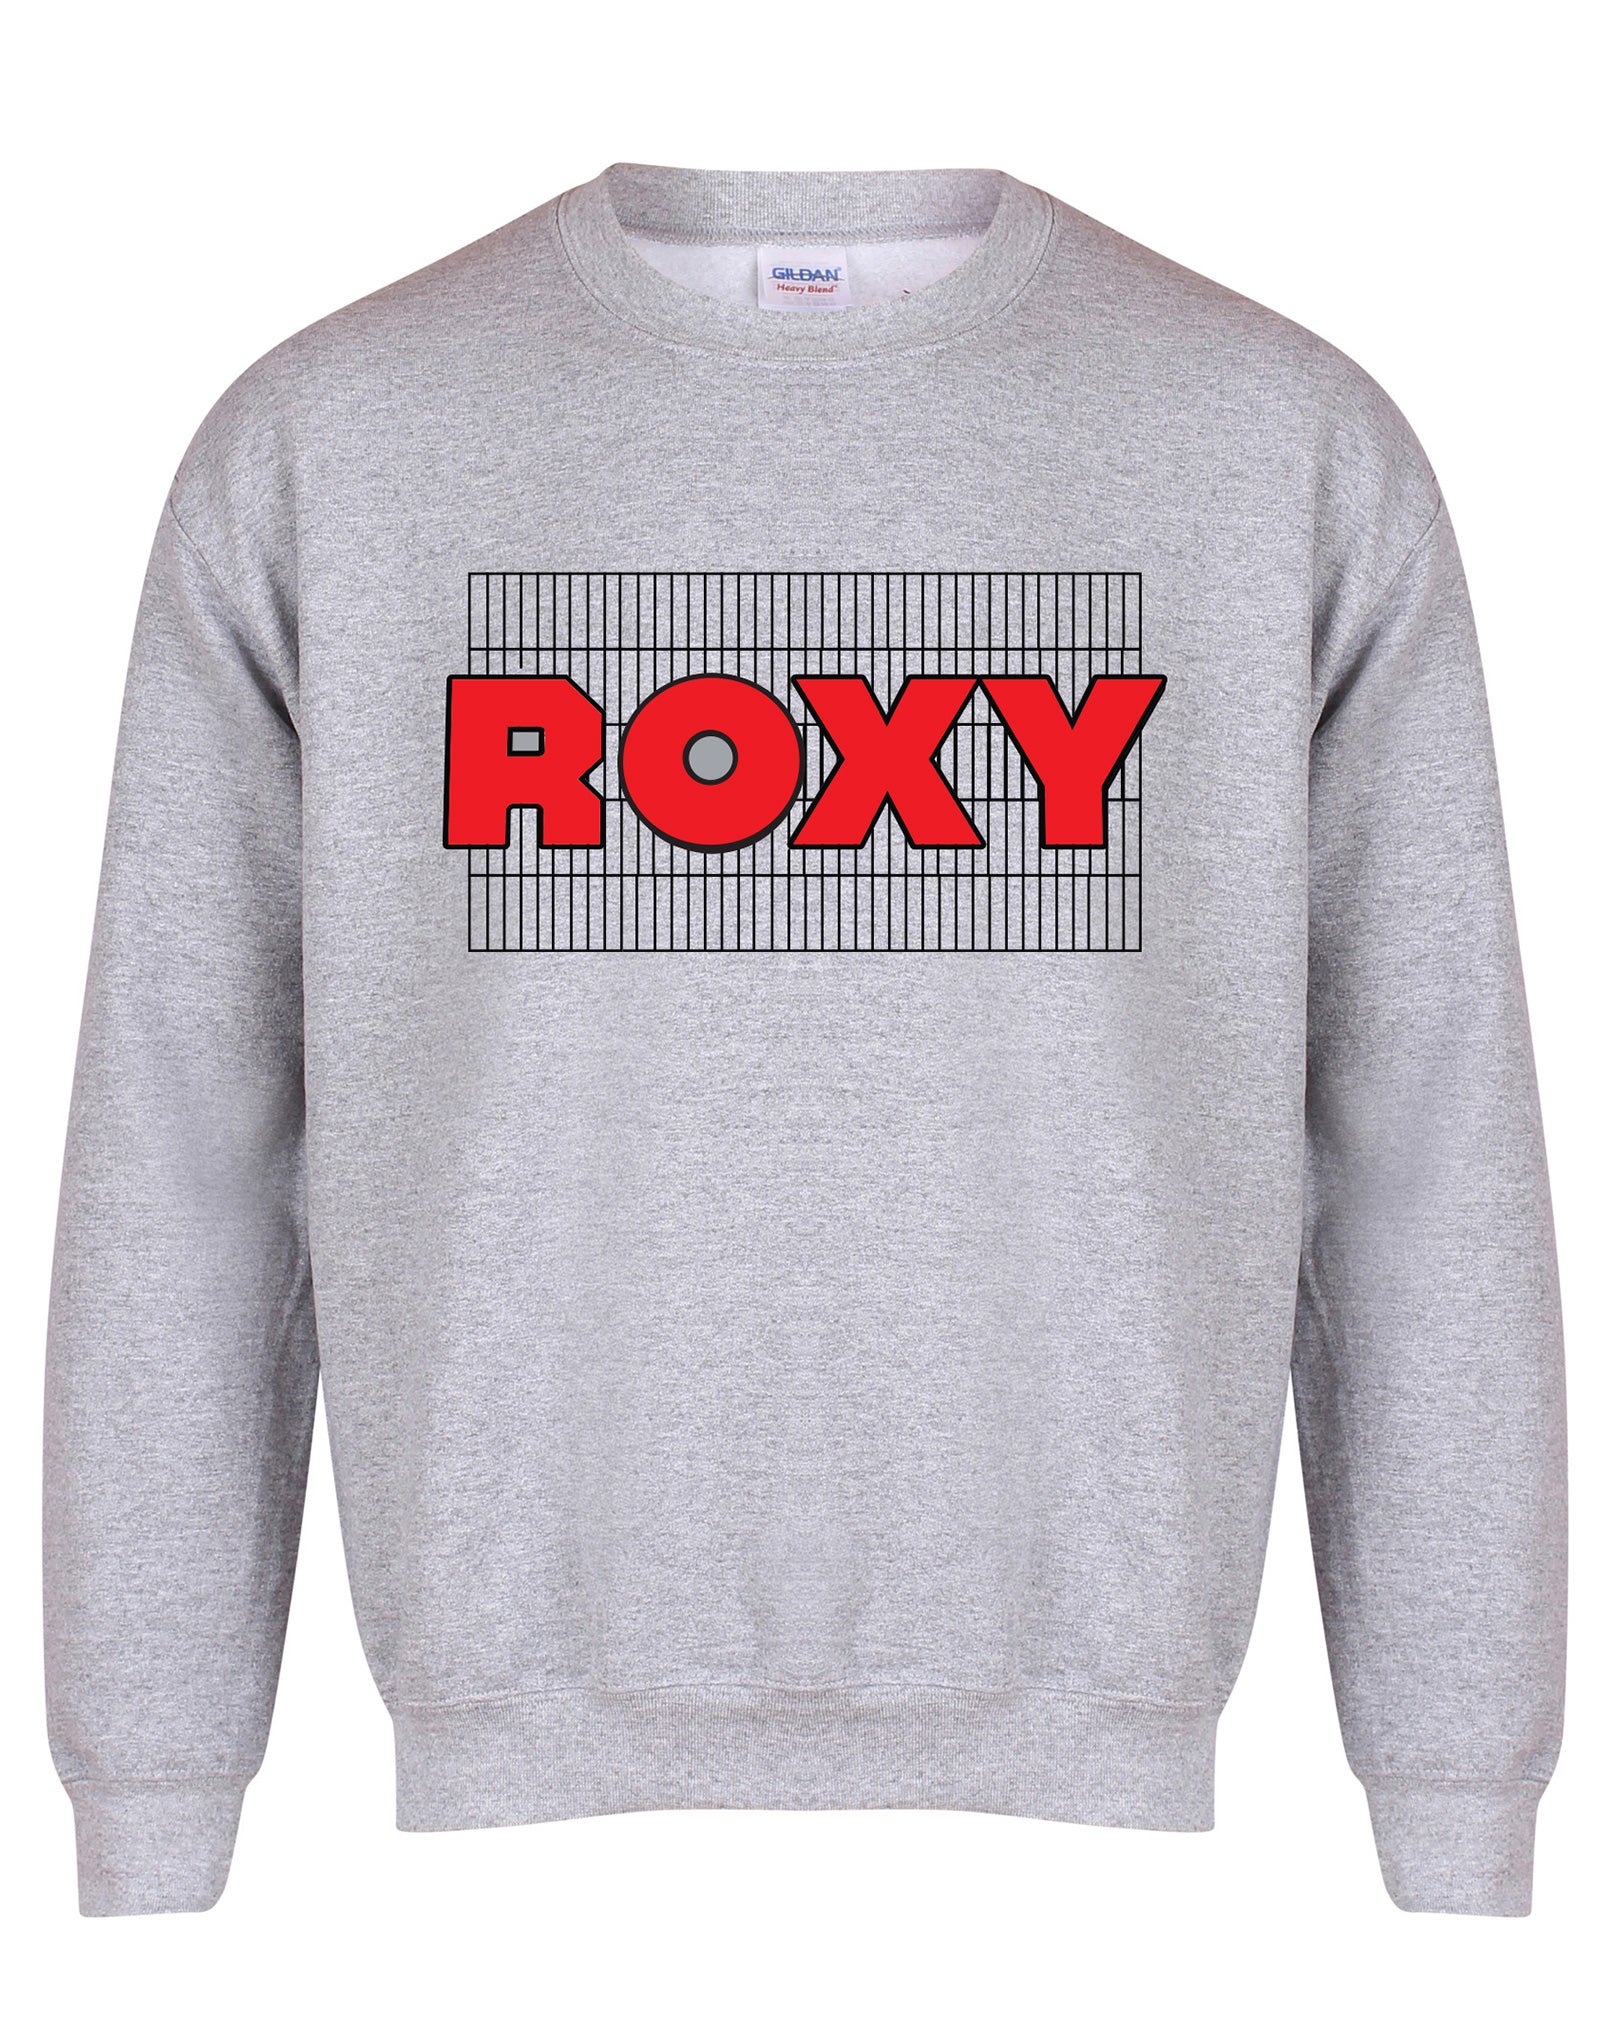 Roxy unisex sweatshirt - various colours - Dirty Stop Outs